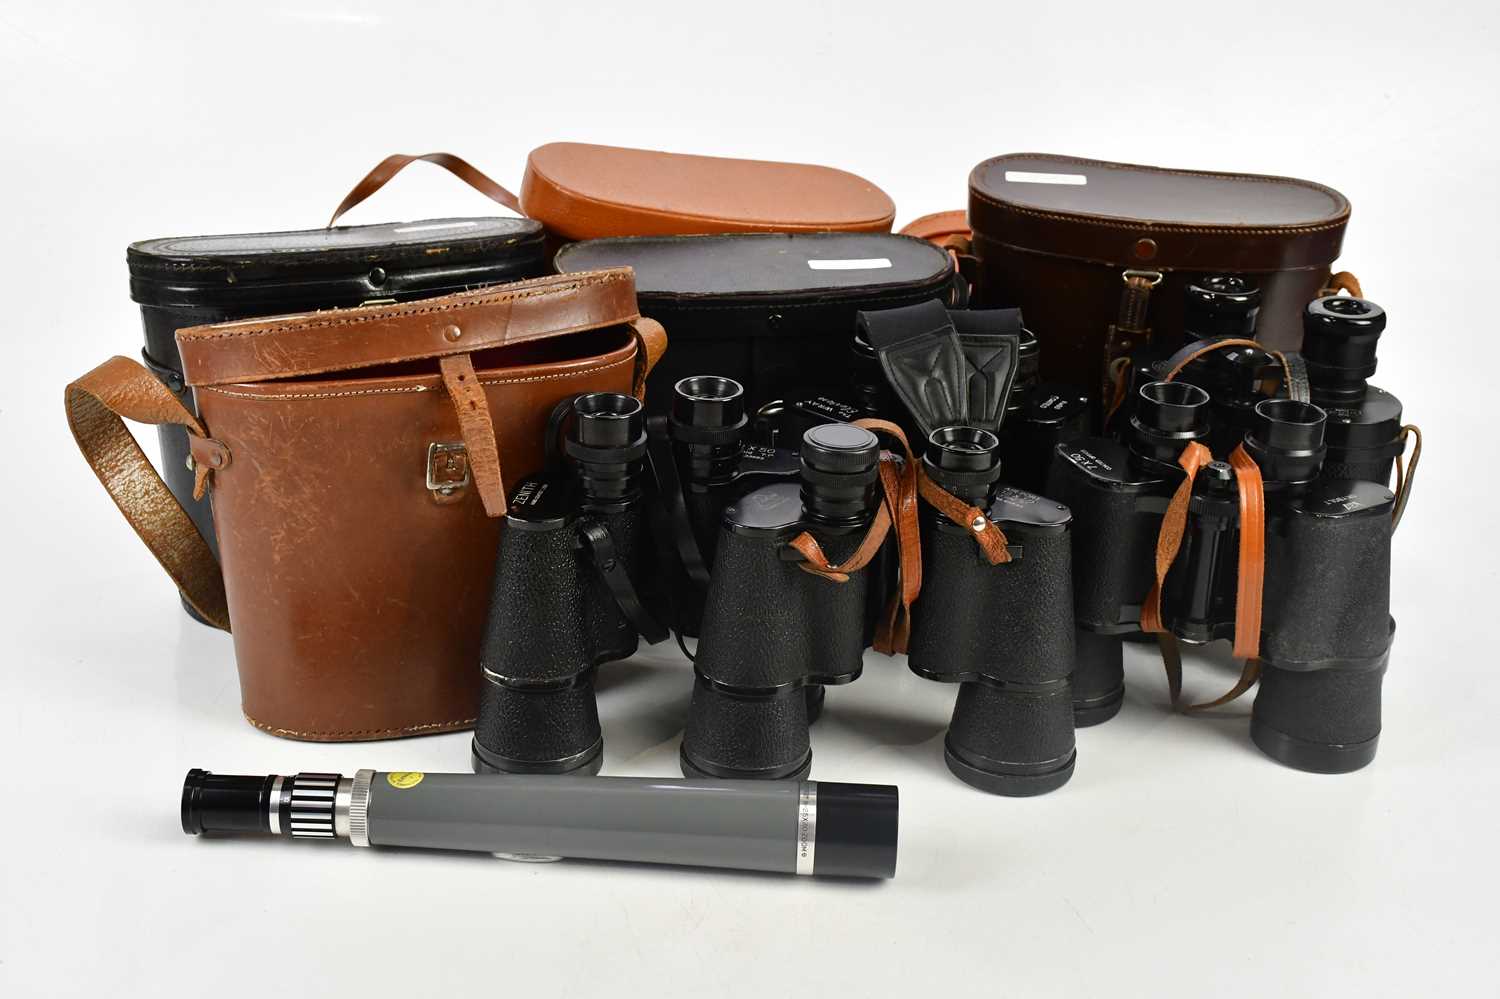 ROSS OF LONDON; a pair of 7x50 binoculars, number 23188, in leather case, with six other pairs of